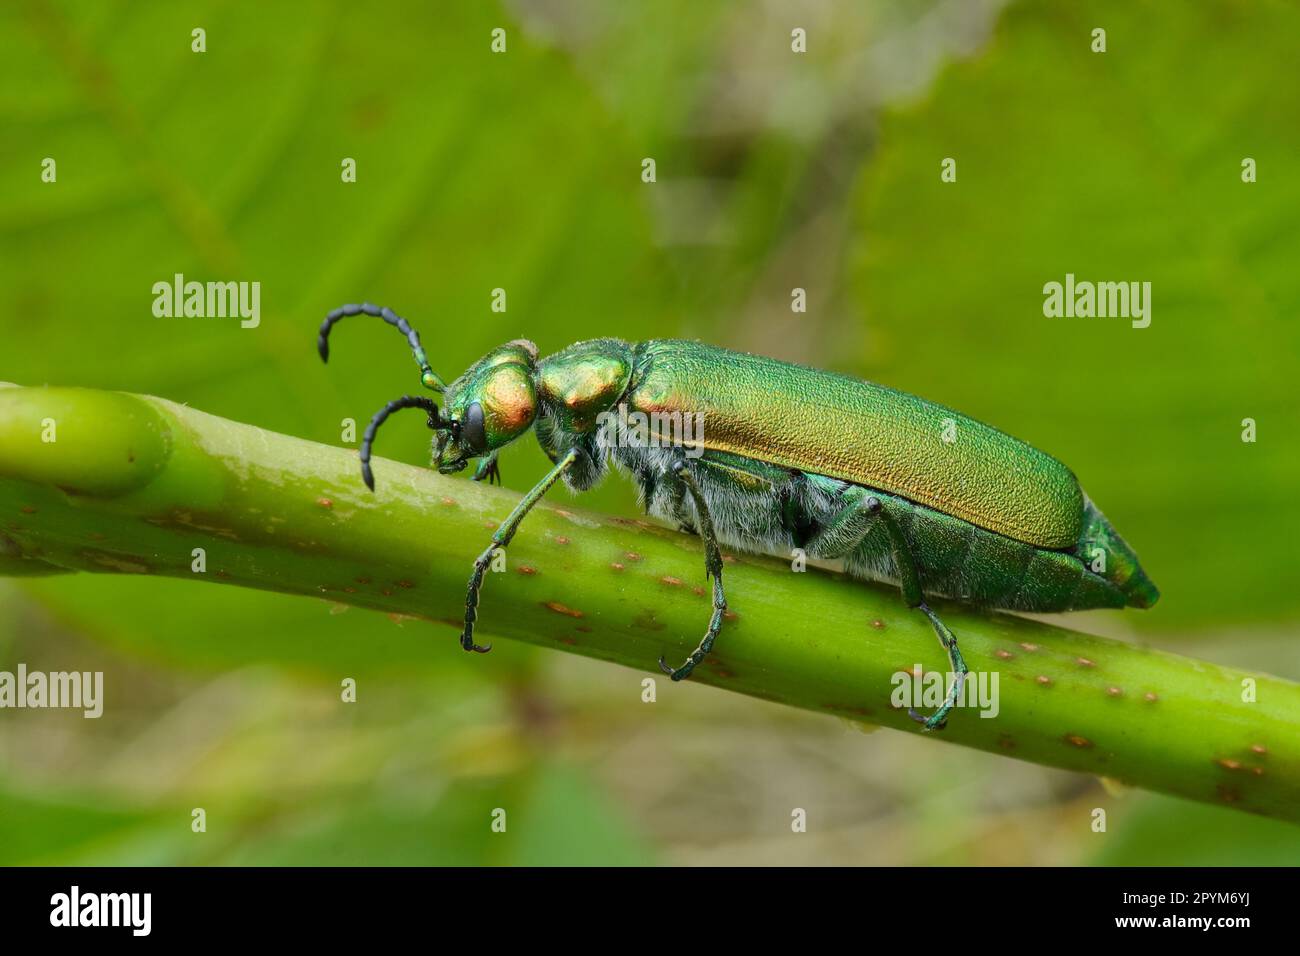 The Spanish fly Lytta vesicatoria is an aposematic emerald-green beetle in the blister beetle family Meloidae Coleoptera. Stock Photo